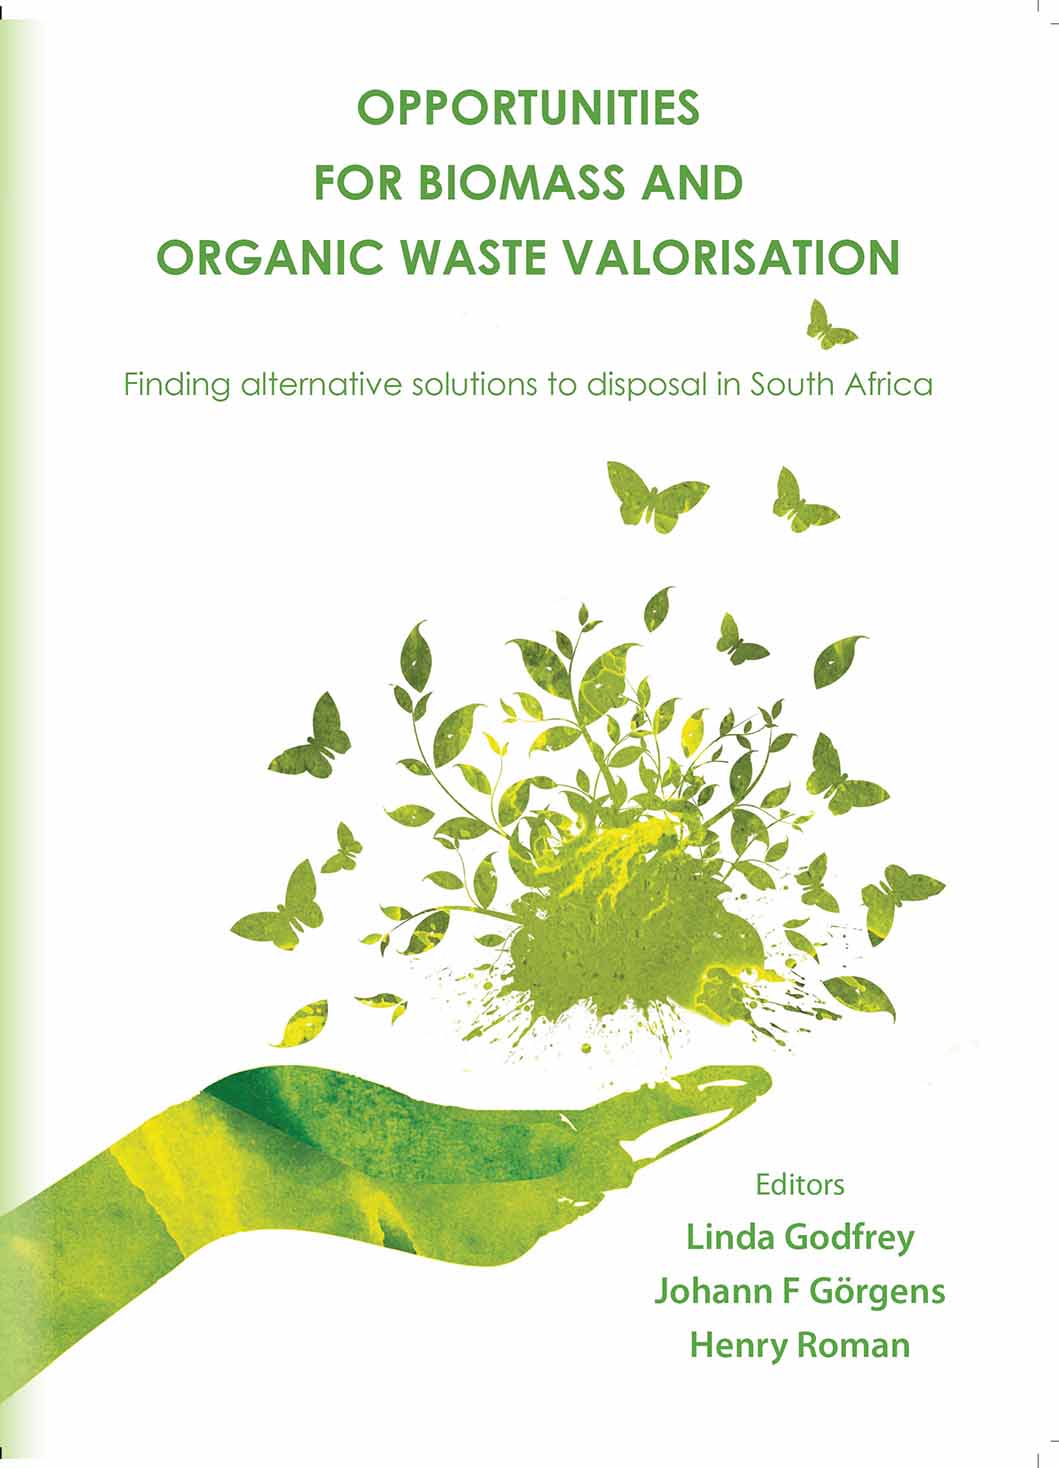 Opportunities For Biomass and Organic Waste Valorisation